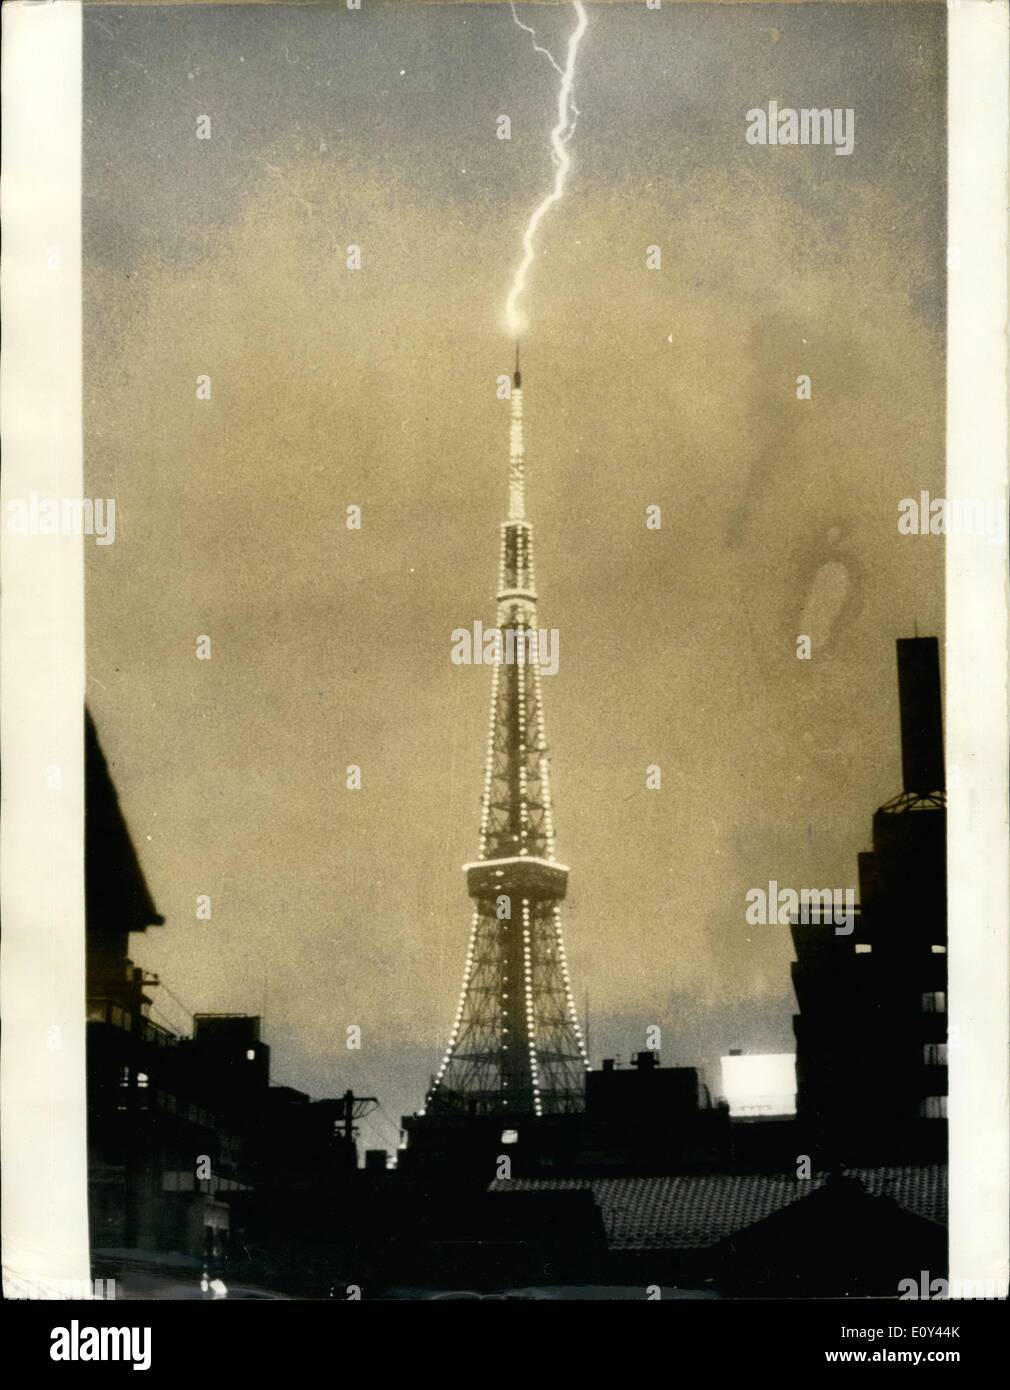 Jul. 07, 1968 - Tokyo Tower Struck By Lighting [Remarkable Picture By Professional Golfer: This unusual picture showing ;lighting striking the very top of Tokyo Tower -the tallest tower in the World - was taken during a recent by Mr. Liem Fords, Chief golf professional at the Kanagawa Country Club in Japan, from a friend's apartment near the tower. He set his camera up when he storm started and gave 1/4 second expouser at 1:1.8, with a 55mm lens, and using a cable release, Mr. Forde, an Irishman born at Bray, Stock Photo